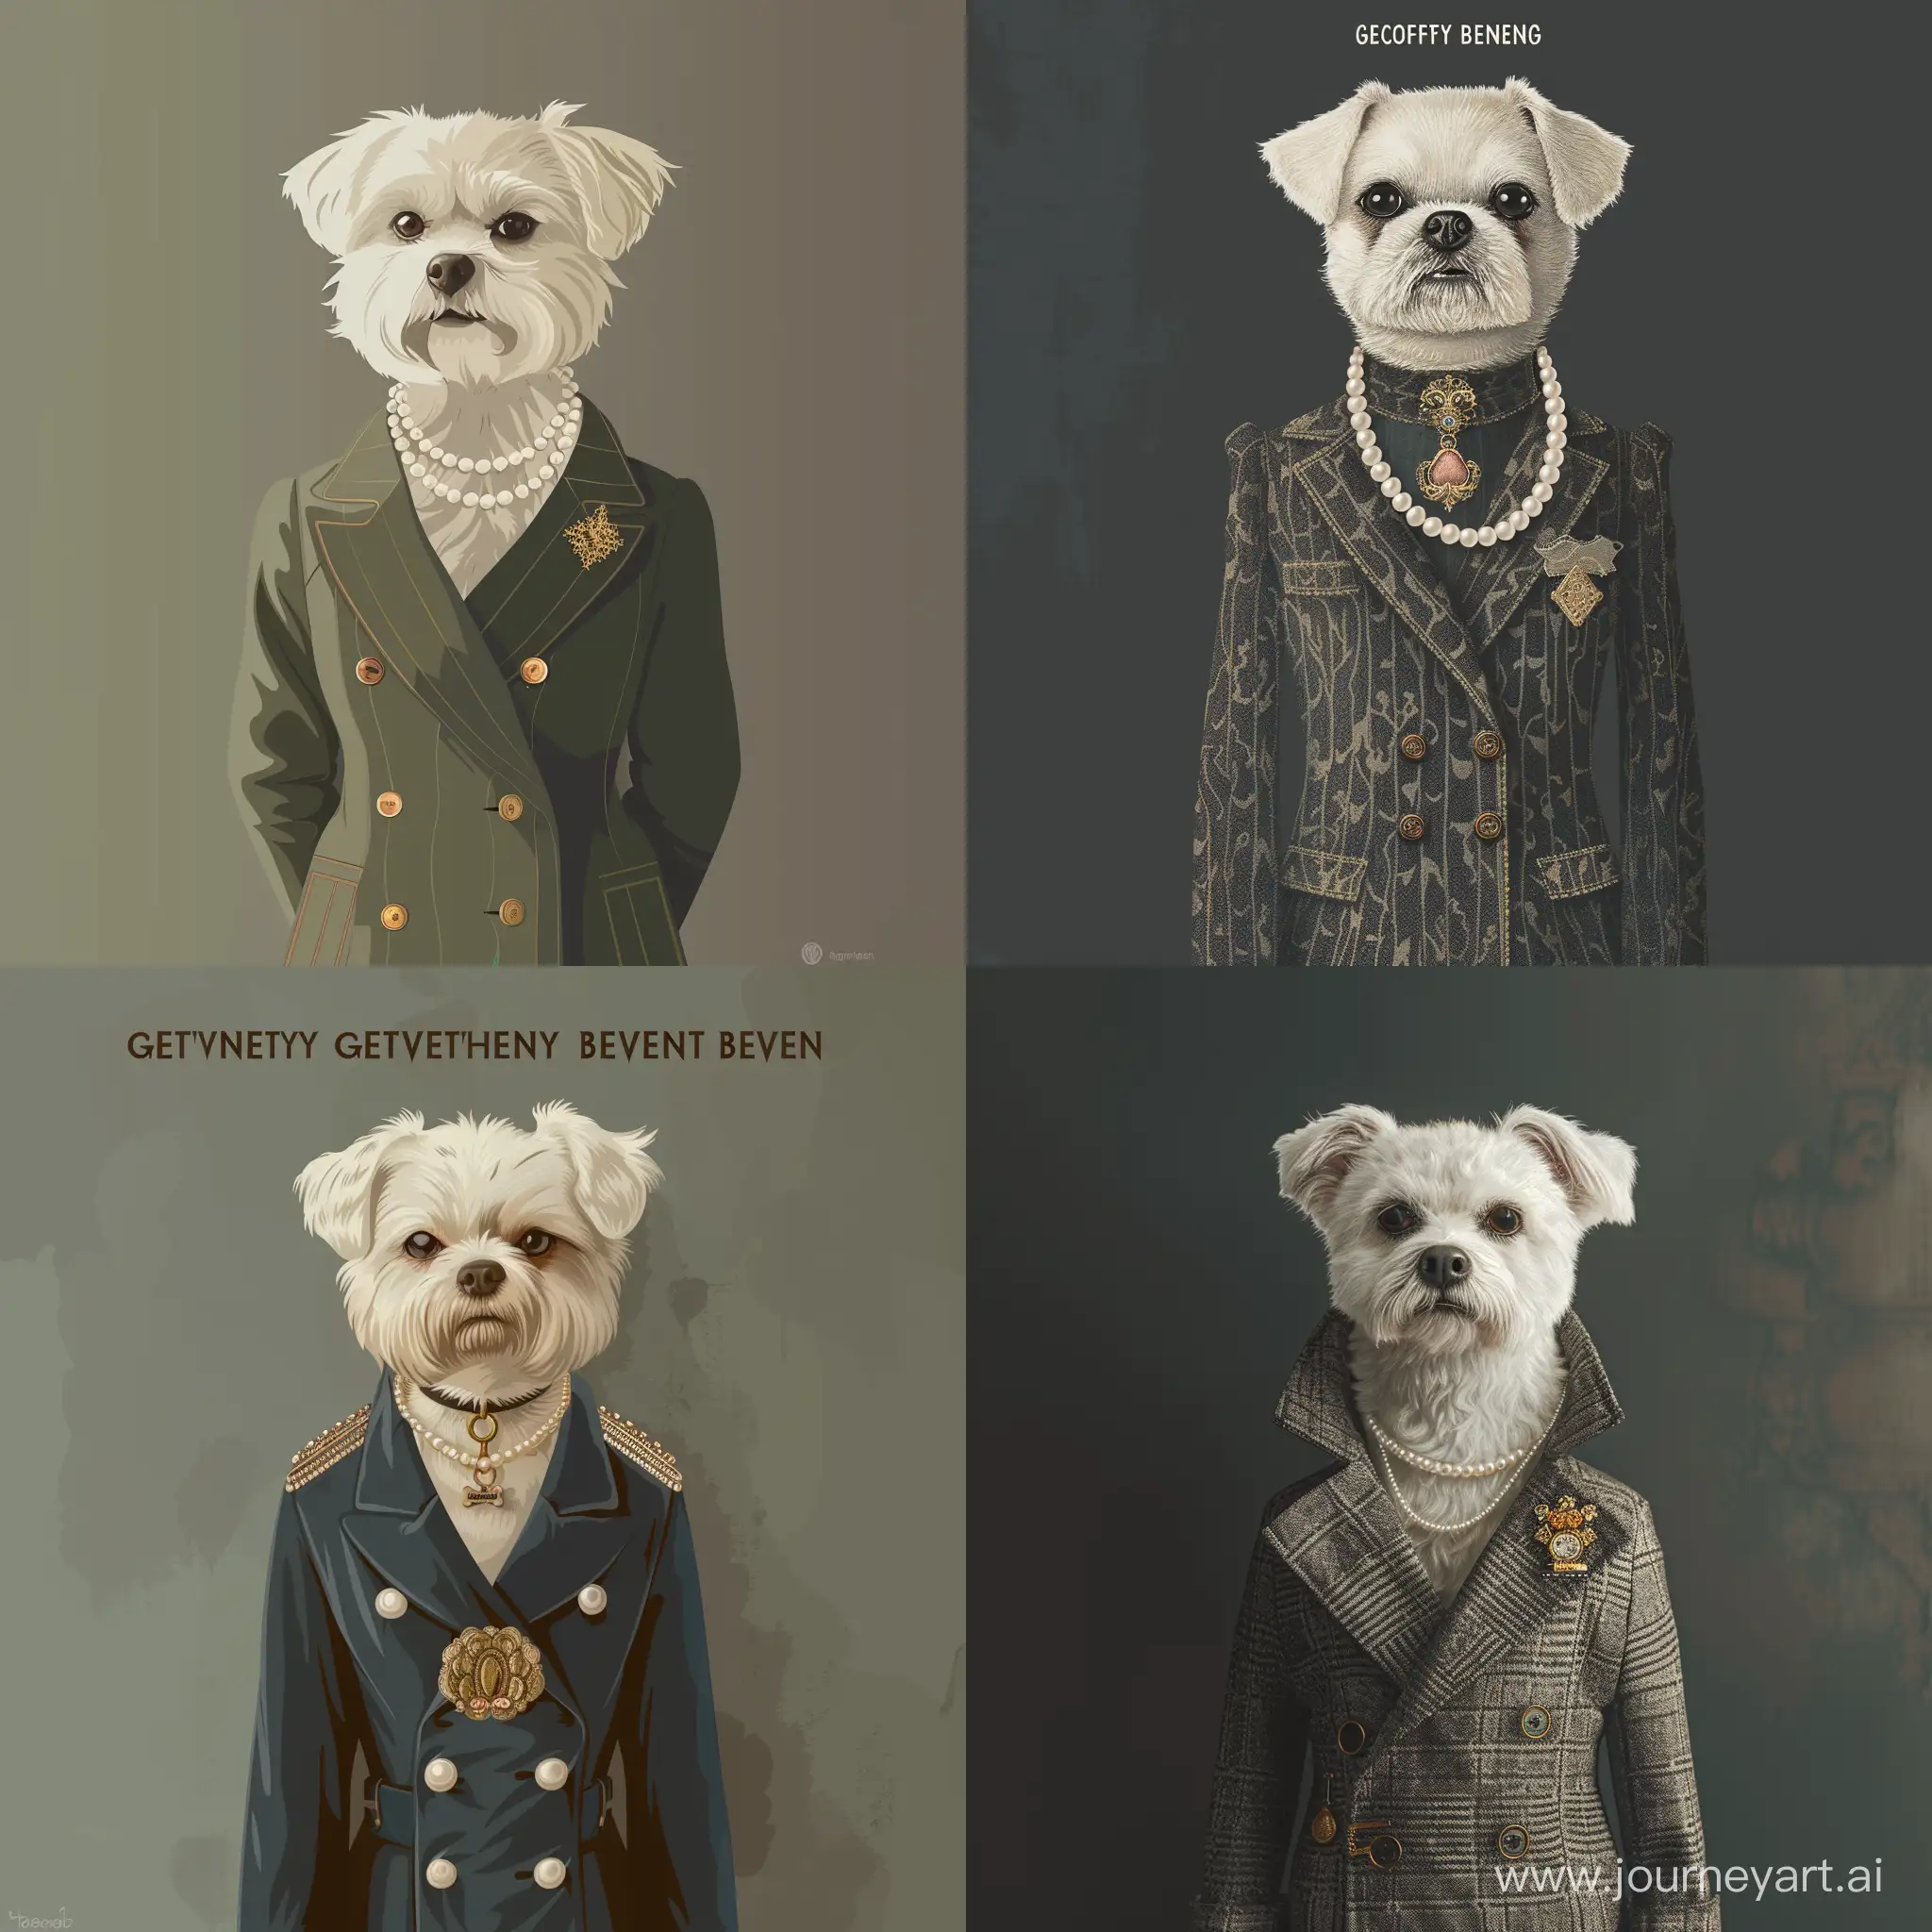 Create an illustration in vintage style of an elegant white Shih Tzu dressed in a vintage Geoffrey Beene coat and wearing a single pearl necklace with a gold brooch standing against a monochromatic background that exudes elegance and luxury. The character should exude confidence and poise, reminiscent of models in a high-end fashion advertisement. The outfit should be elegant, tailored impeccably, and reflective of vintage fashion trends seen on runways. Accessories should be minimal yet striking, complementing the overall look. The lighting should be dramatic, enhancing the textures and silhouettes of the outfit. The white Shih Tzu should be positioned centrally, making direct eye contact with the viewer as if gazing through the lens of a camera on a fashion shoot. The outfit should always maintain a look that would be at home on the pages of a luxury fashion magazine, in flat vintage style, high quality detailed